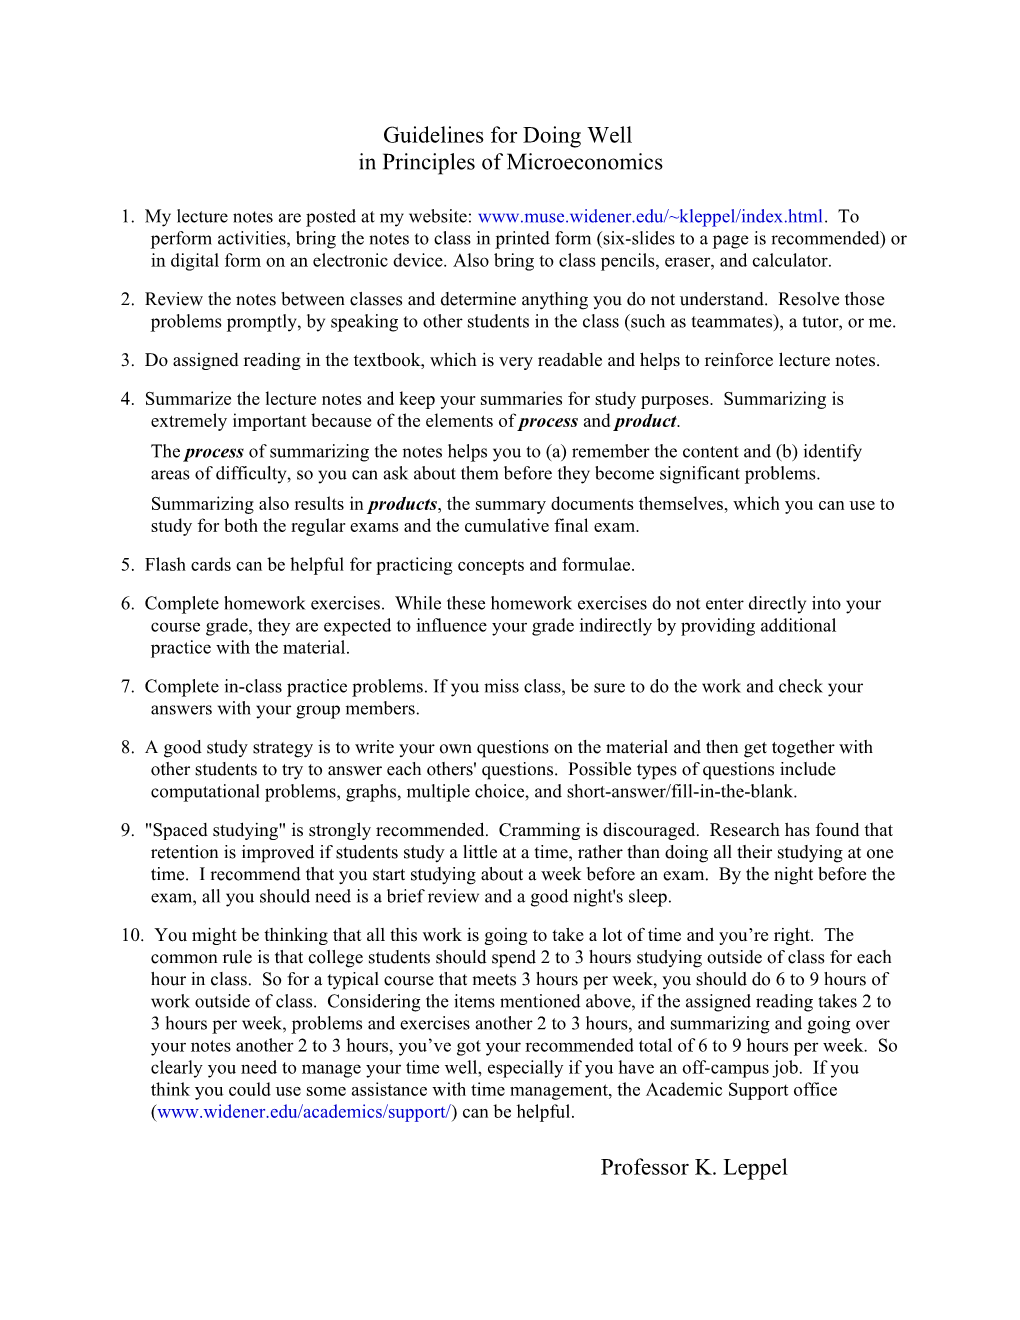 Guidelines for Doing Well in Principles of Microeconomics (EC202)